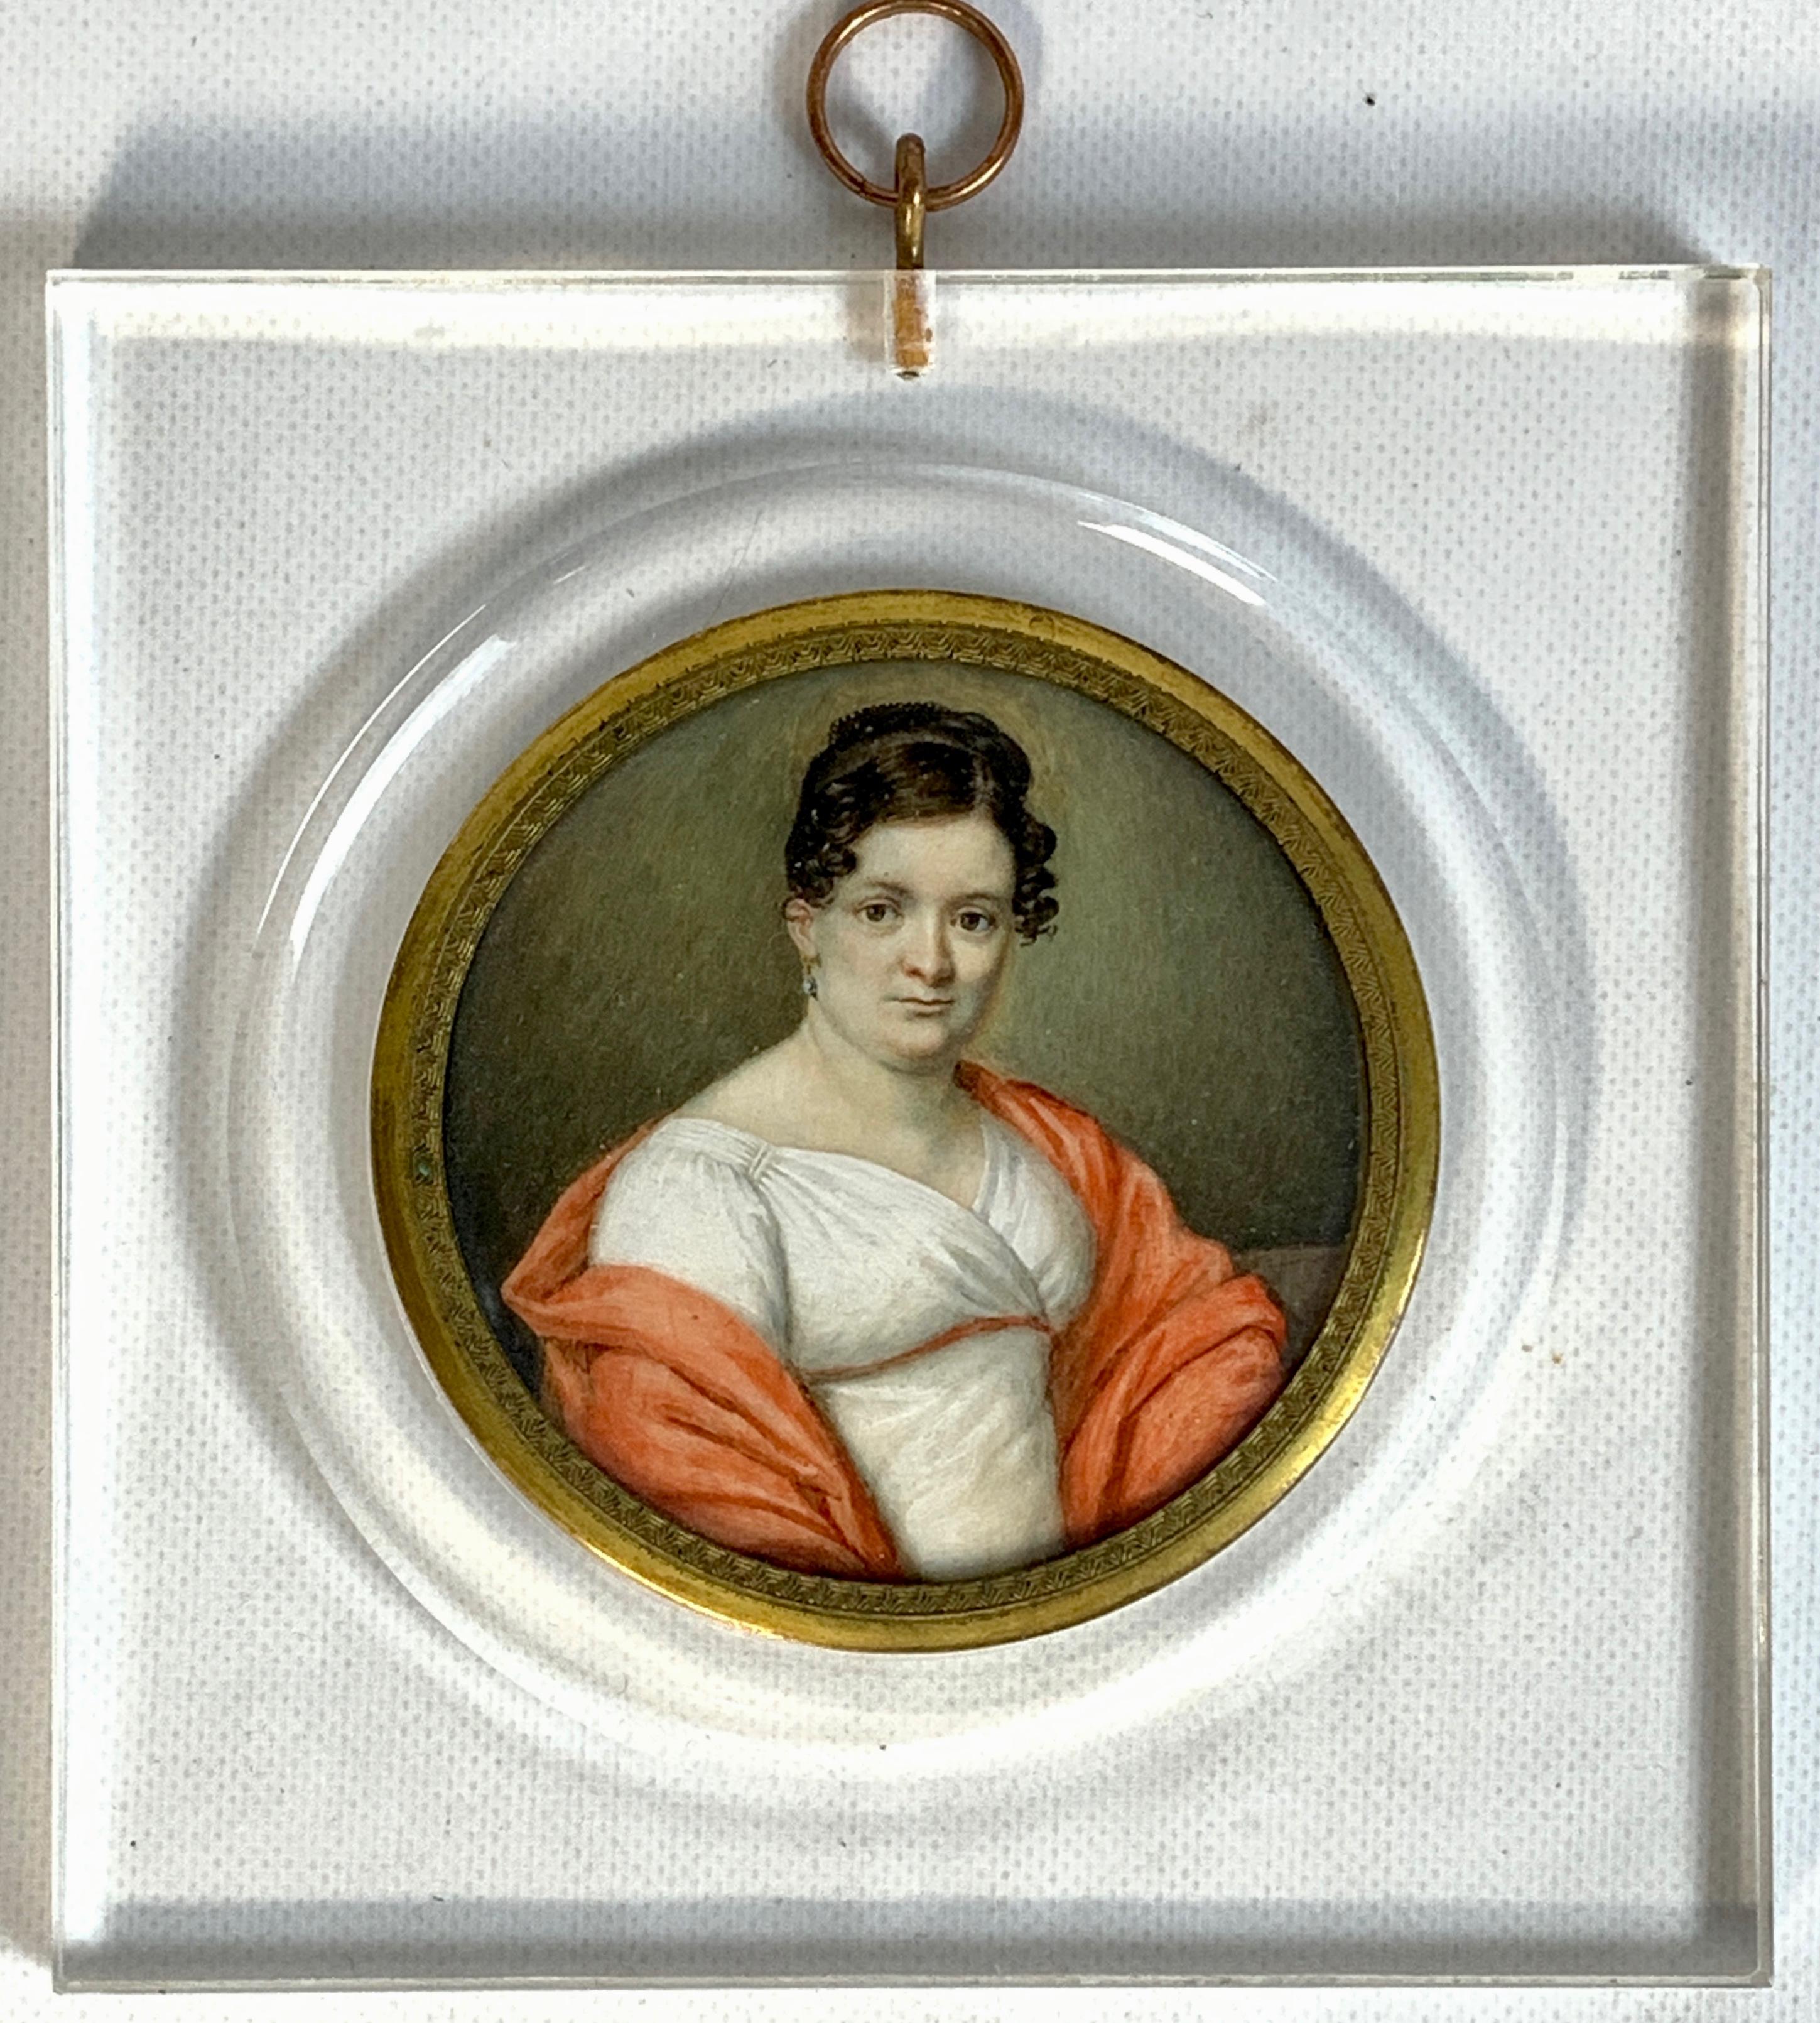 A beautifully painted early 19th century Italian portrait miniature of an elegant woman in white dress with coral shawl. Recently framed in Lucite frame.